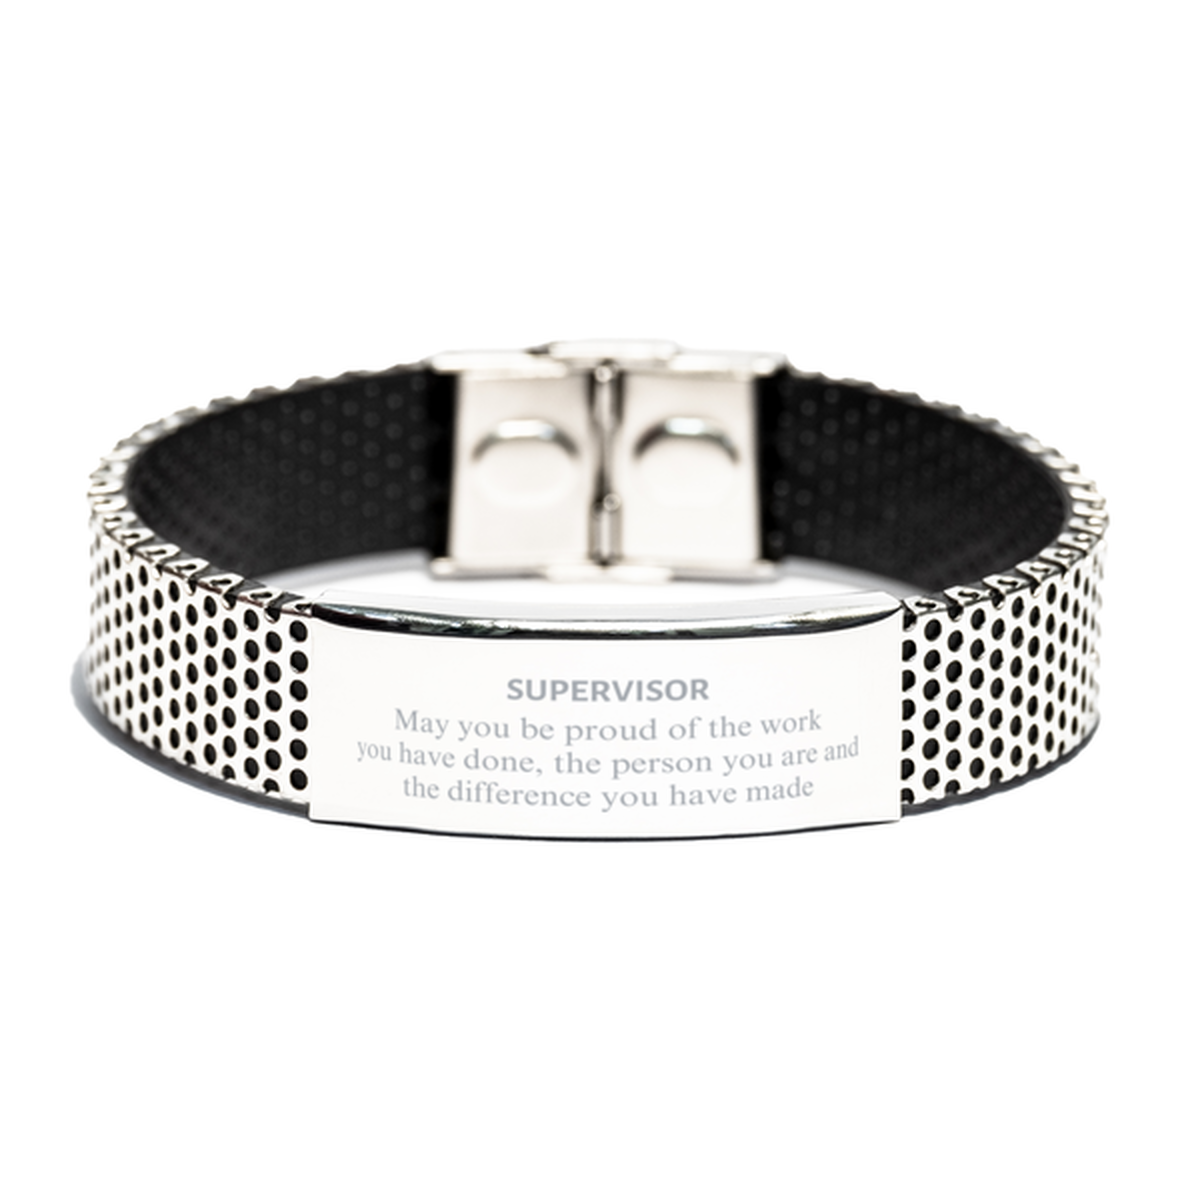 Supervisor May you be proud of the work you have done, Retirement Supervisor Stainless Steel Bracelet for Colleague Appreciation Gifts Amazing for Supervisor